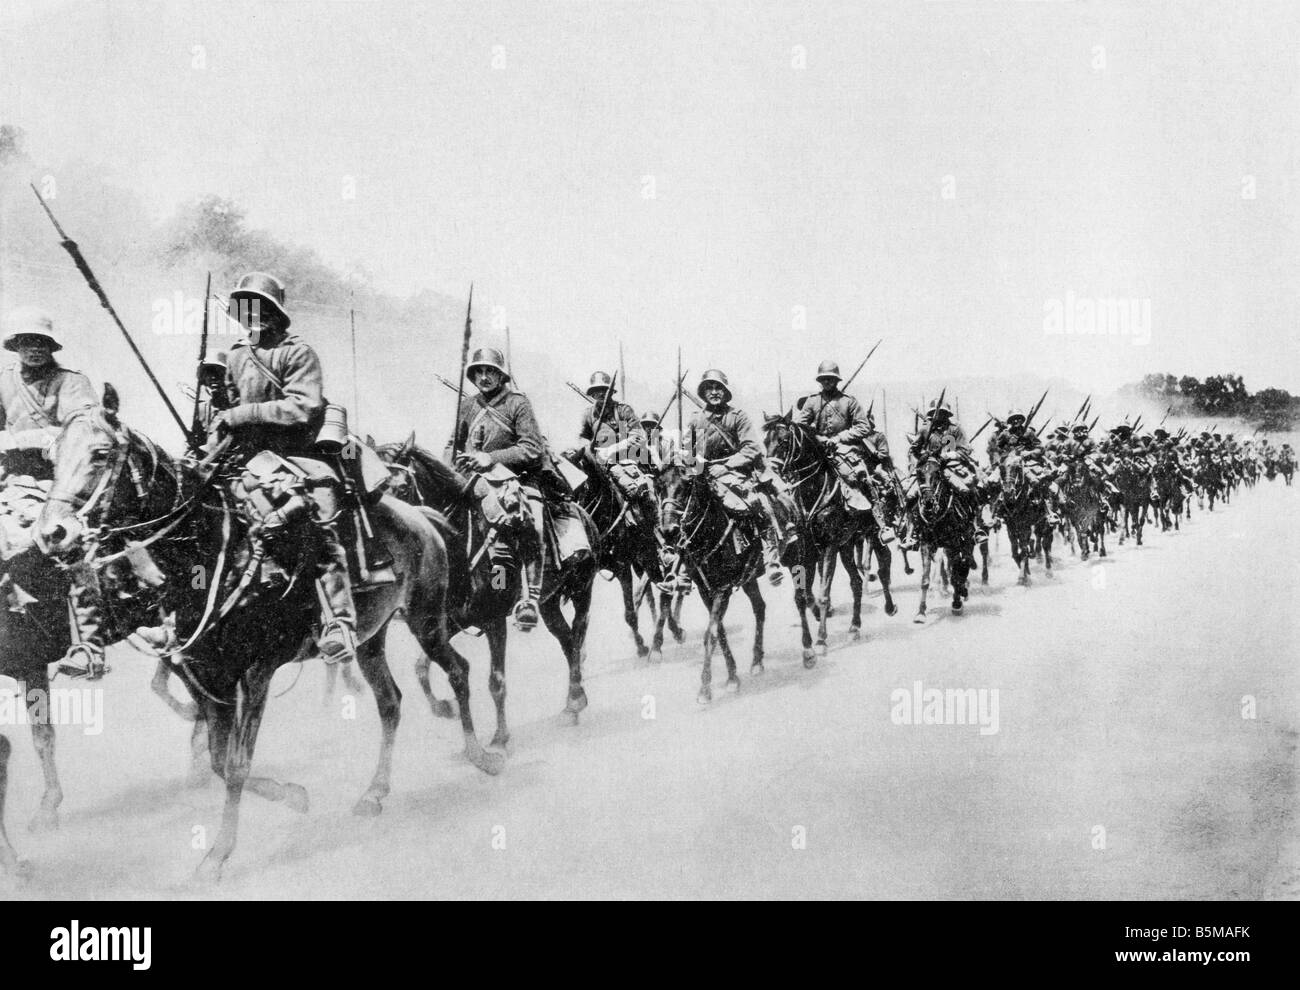 2 G55 W1 1918 27 E German cavalry adavnaces WWI 1918 History World War I Western Front The German offensive in the West Cavalry Stock Photo